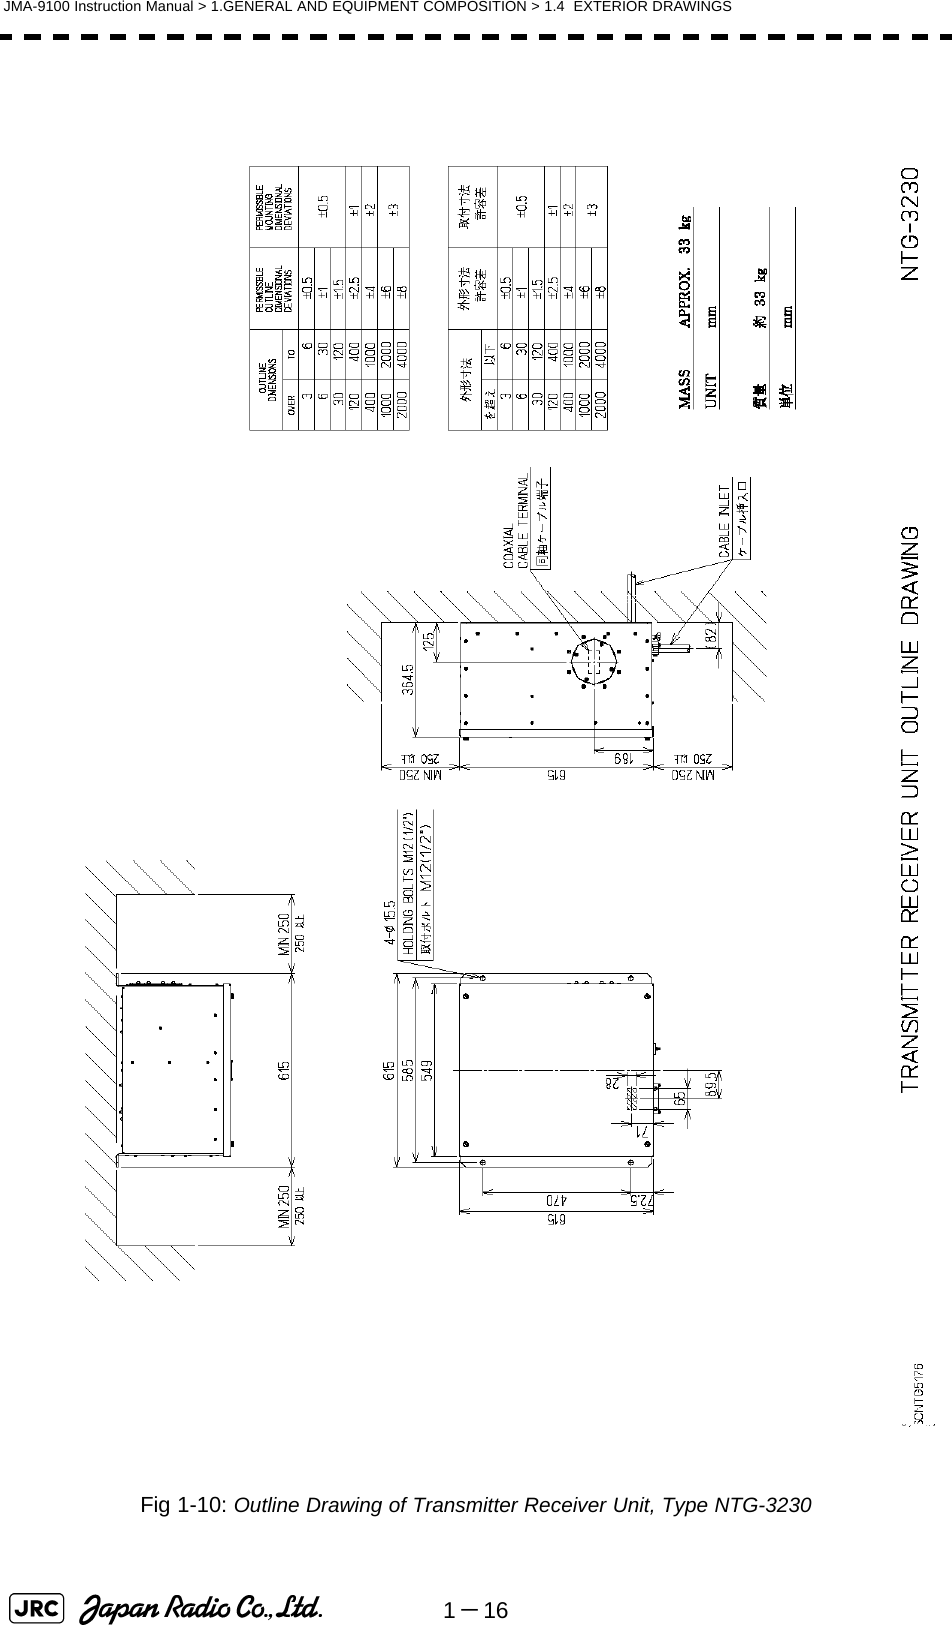 1－16JMA-9100 Instruction Manual &gt; 1.GENERAL AND EQUIPMENT COMPOSITION &gt; 1.4  EXTERIOR DRAWINGSFig 1-10: Outline Drawing of Transmitter Receiver Unit, Type NTG-3230